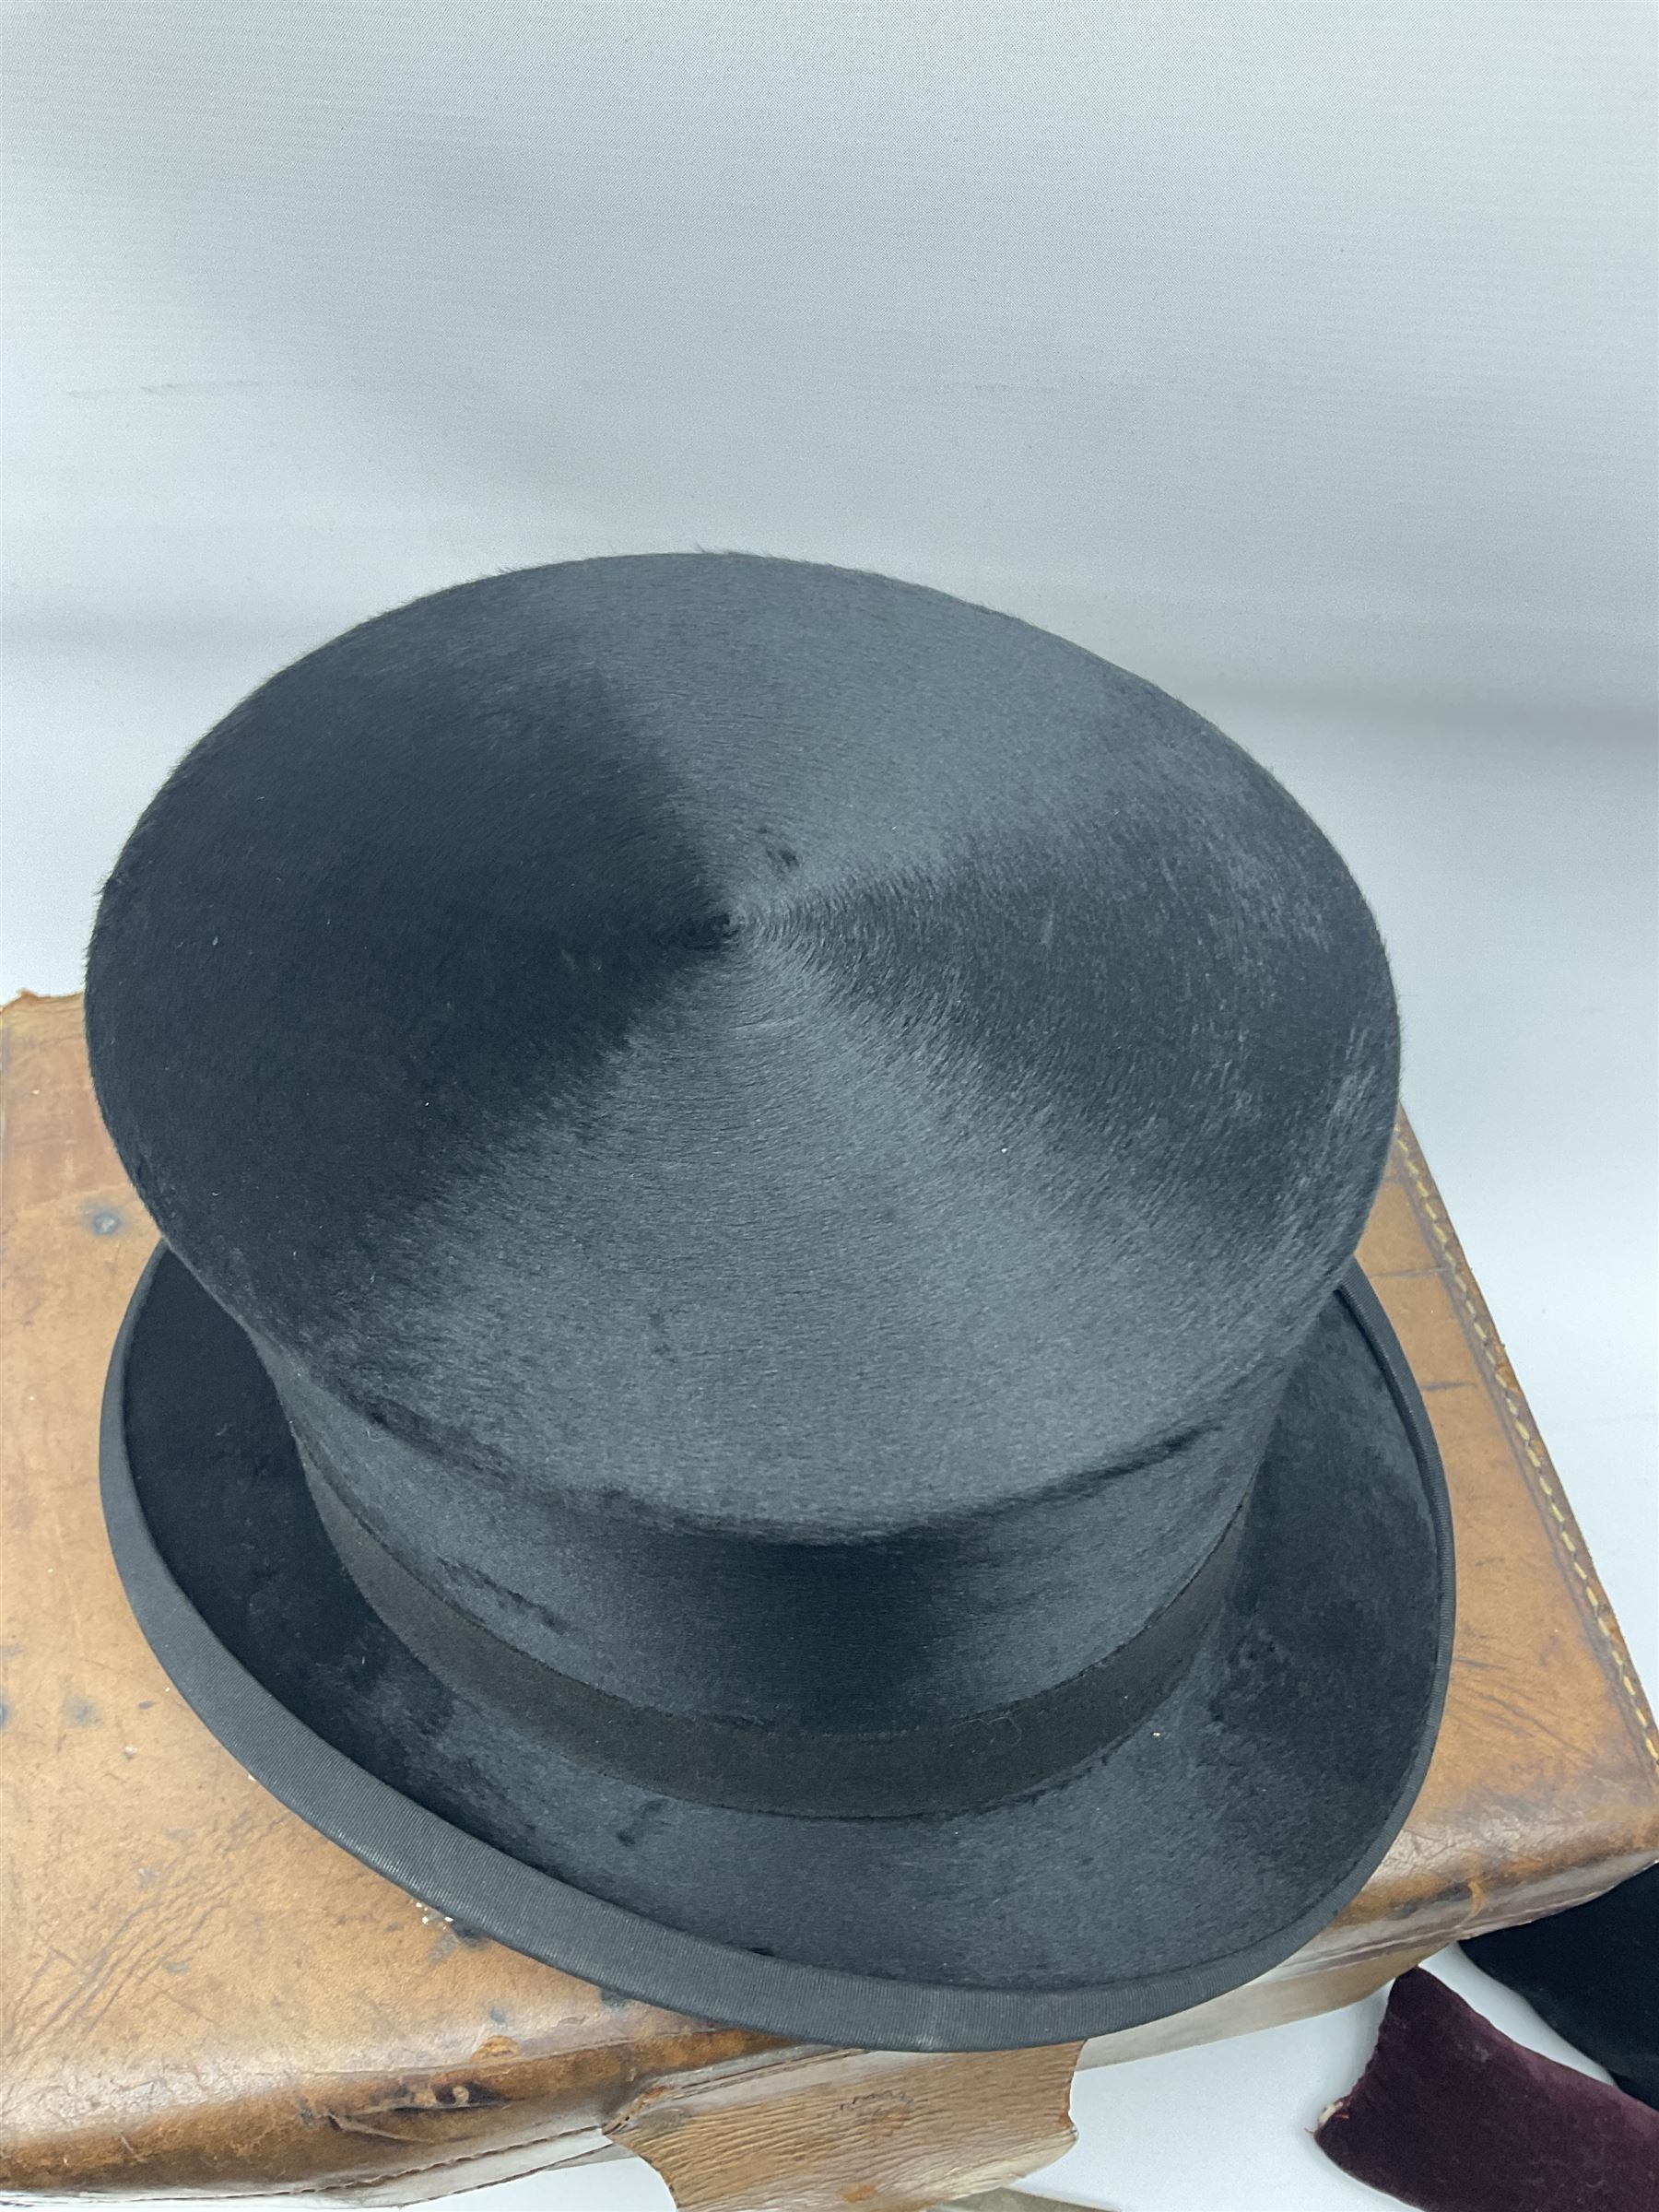 Gentlemen's black brushed silk top hat by Henry Heath of London housed in a leather case with dark r - Image 7 of 9